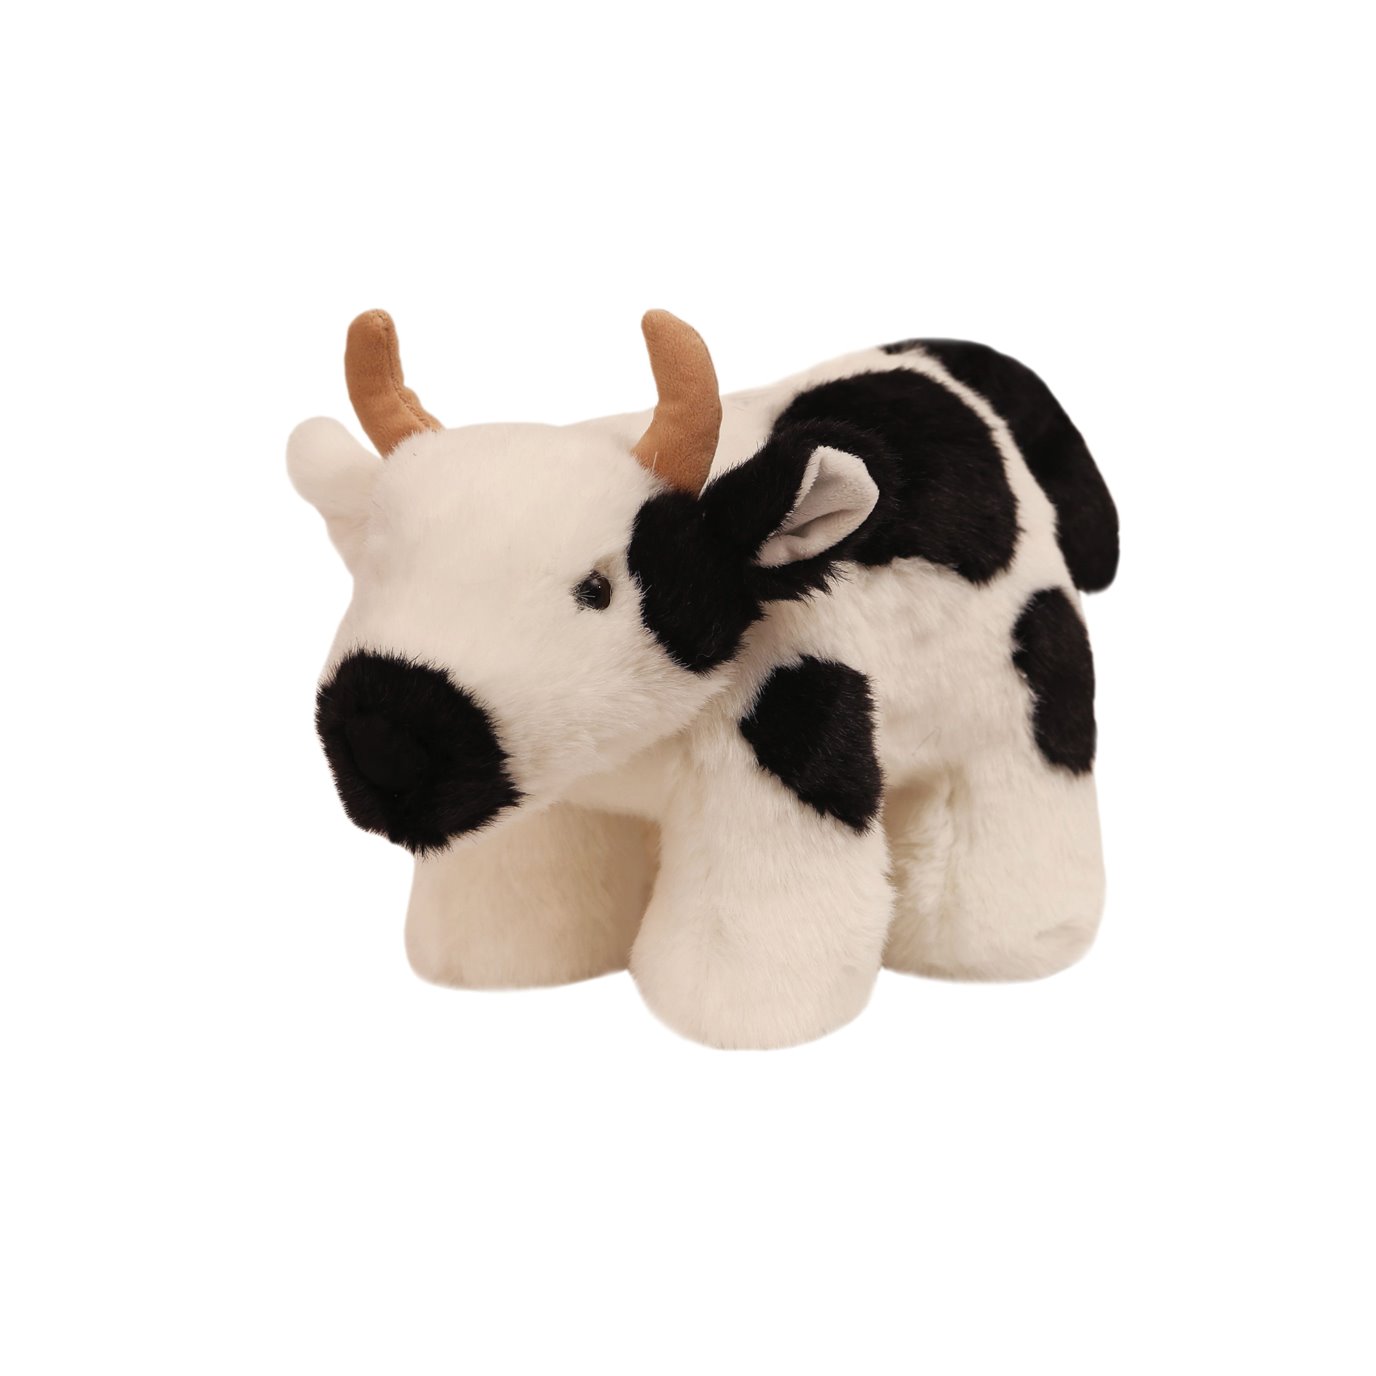 Carstens Plush Cow Coin Bank